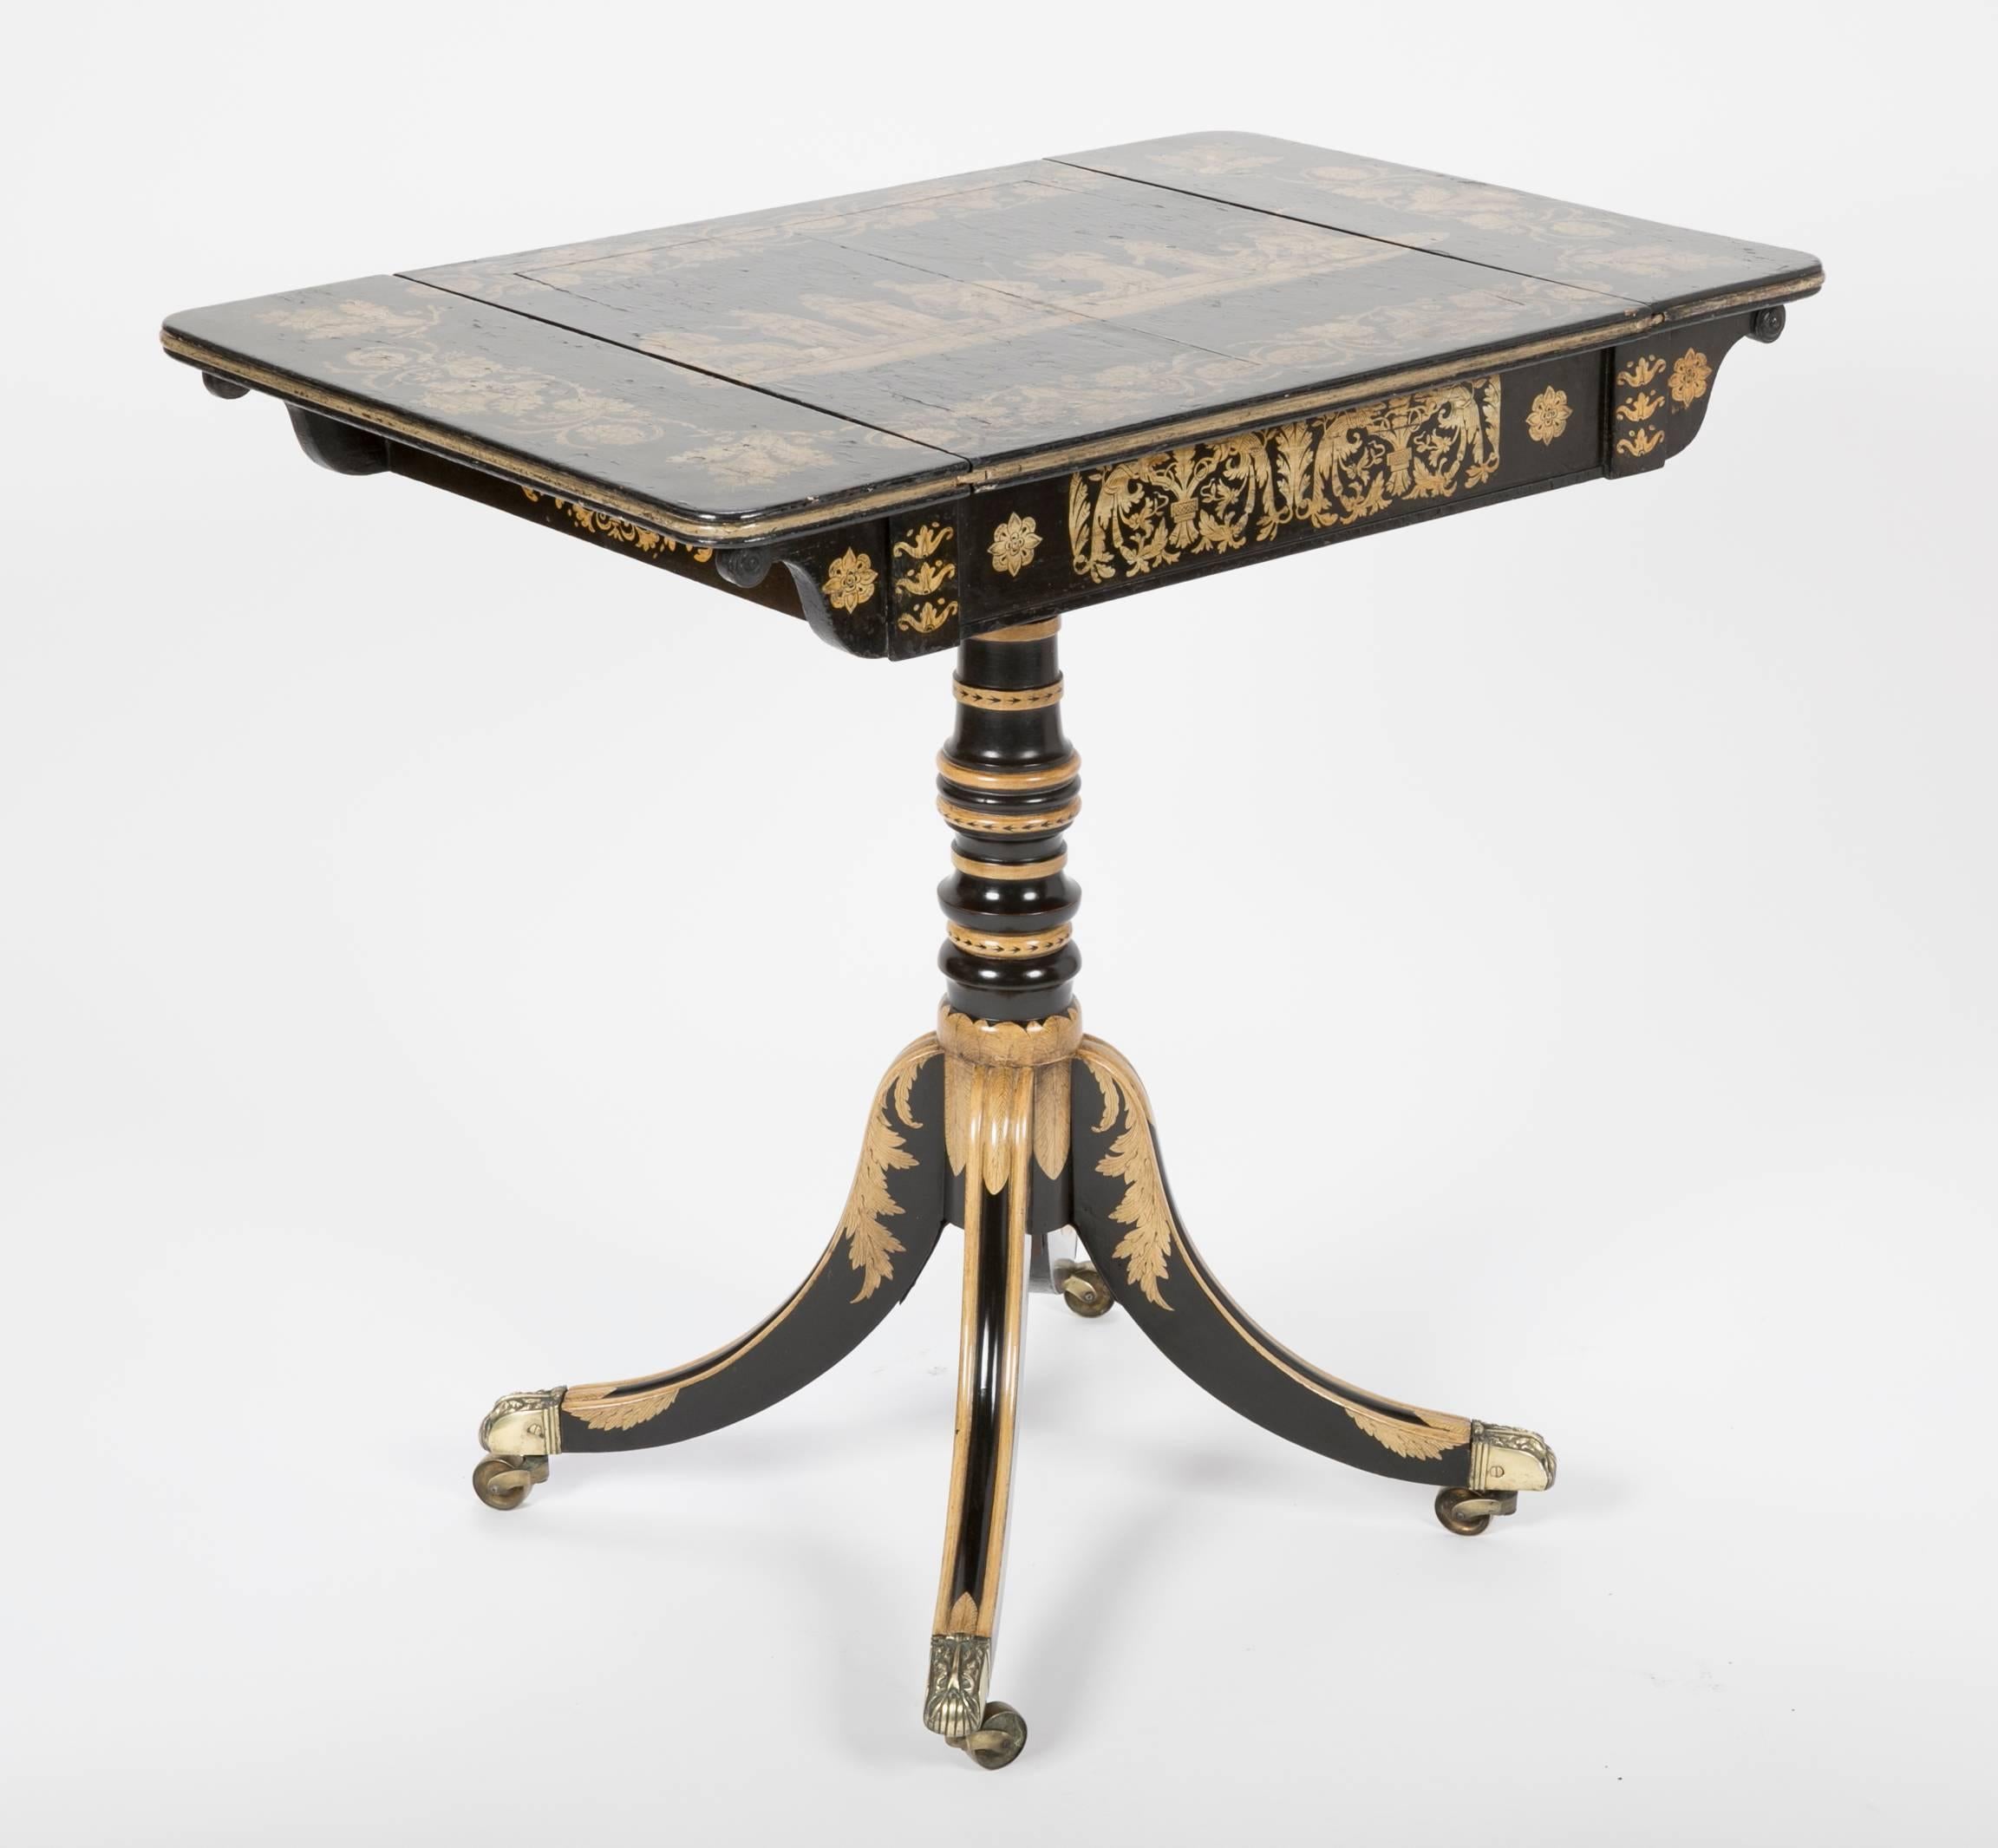 Penwork games table with pedestal on four legs and wheeled feet, English, circa 1810.